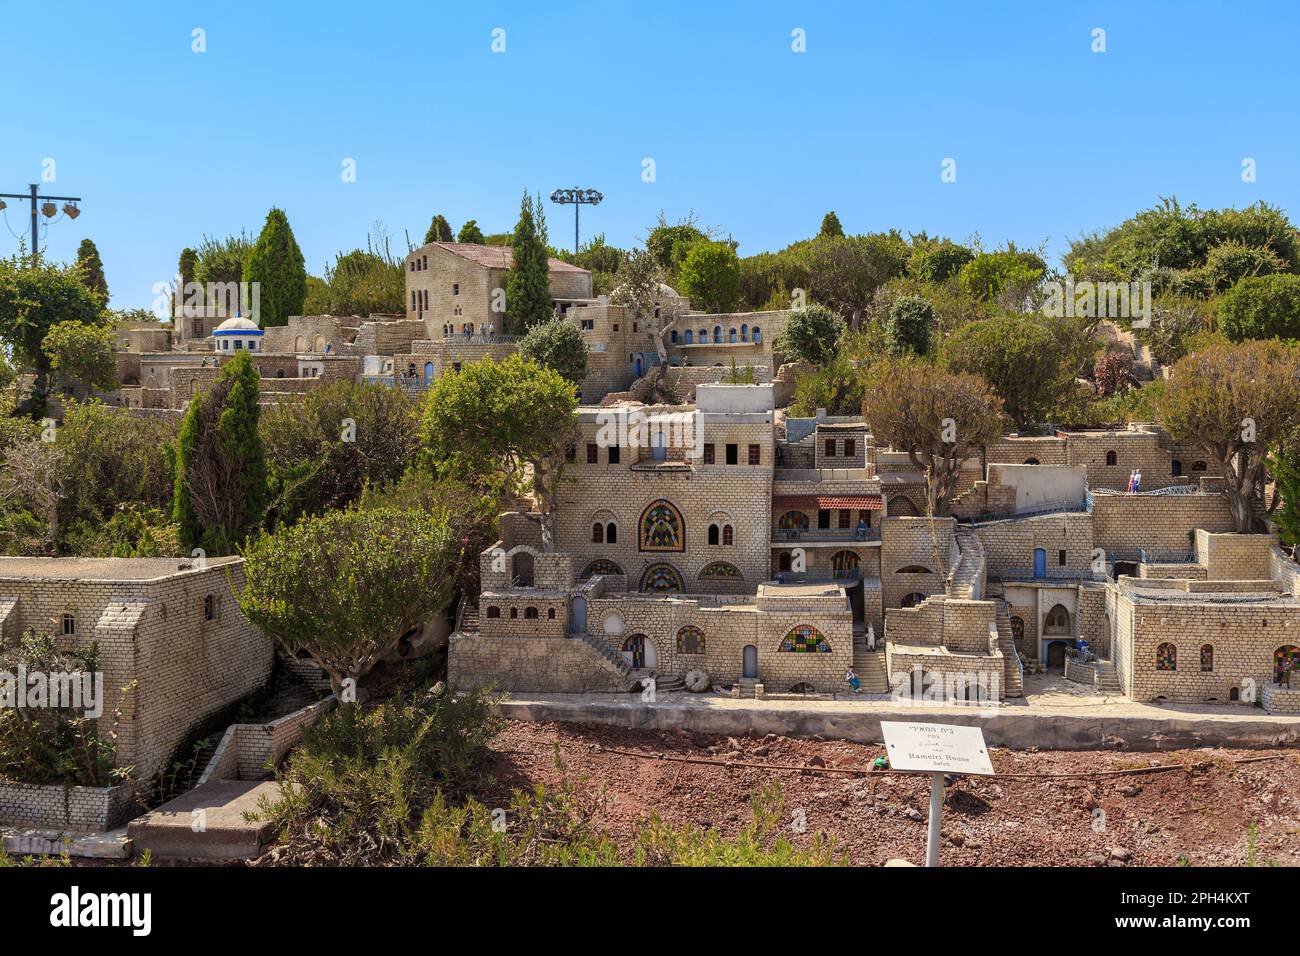 LATRUN, ISRSAEL - SEPTEMBER 18, 2017: This is the layout of the development of old Safed in the Mini Israel miniature park. Stock Photo